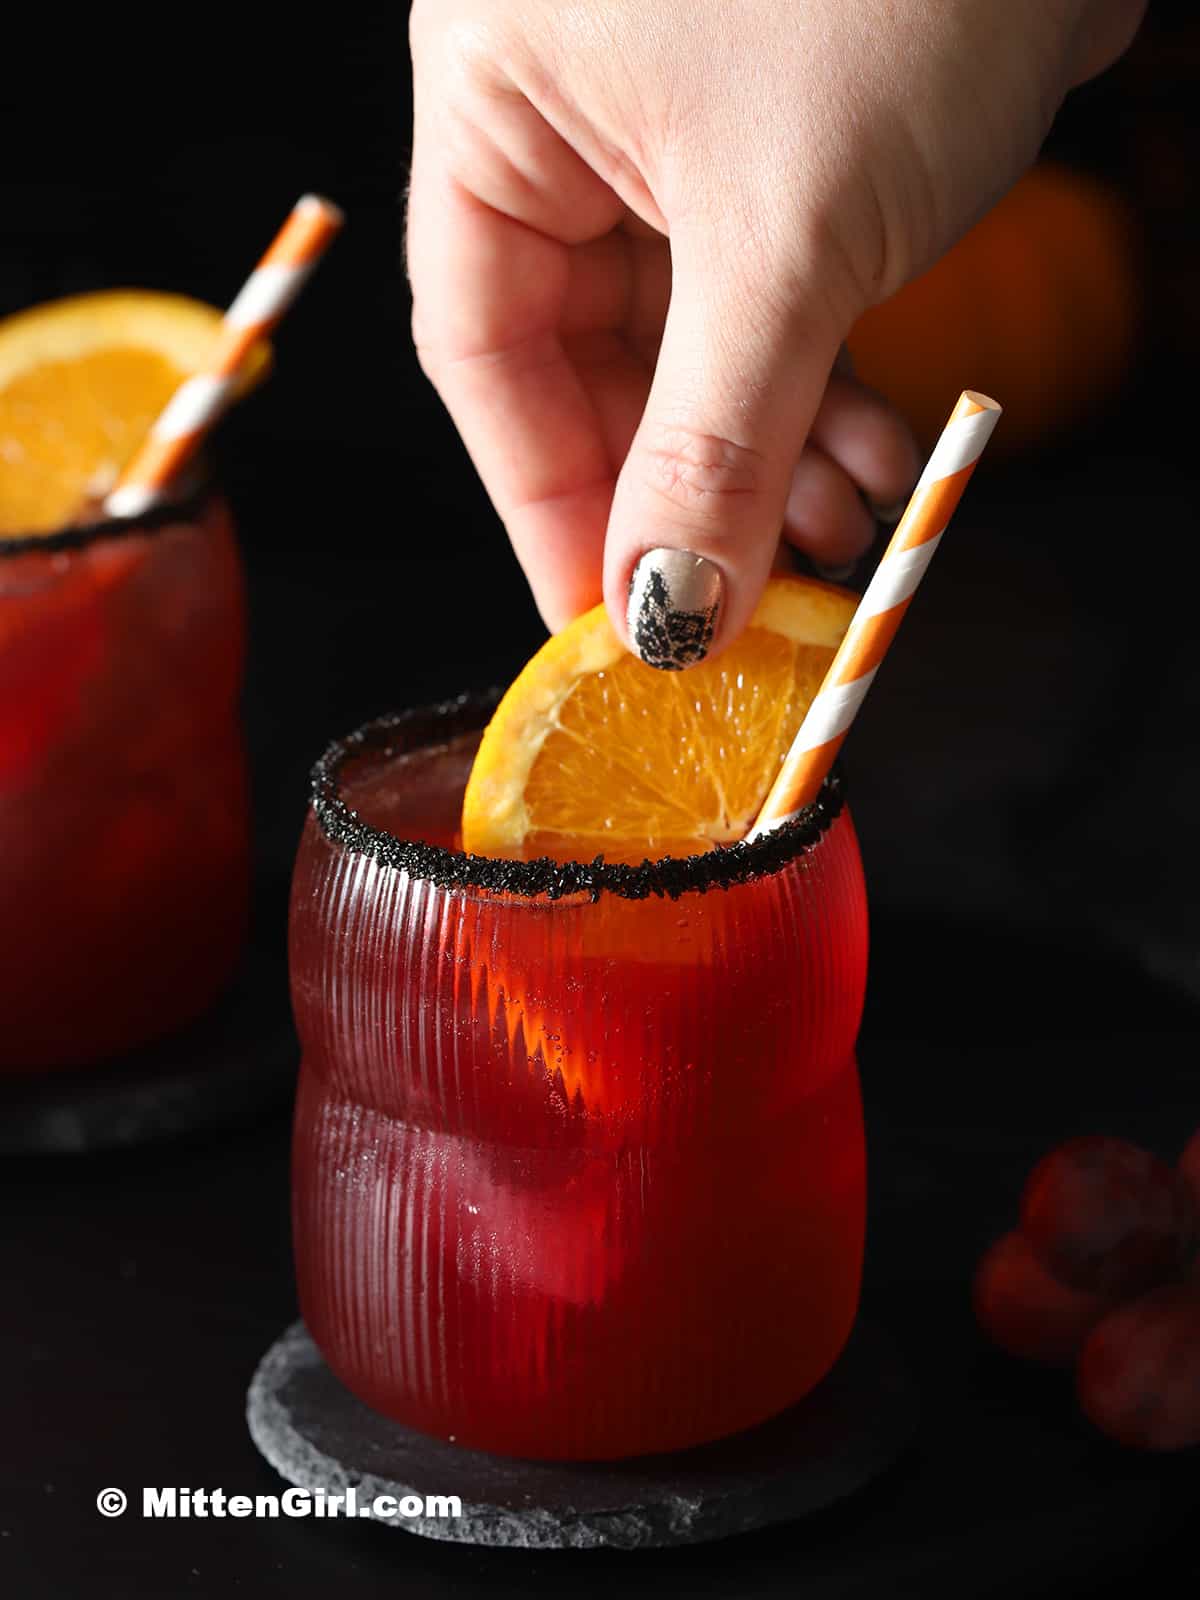 A hand placing a slice of orange into a glass filled with Halloween mocktail.